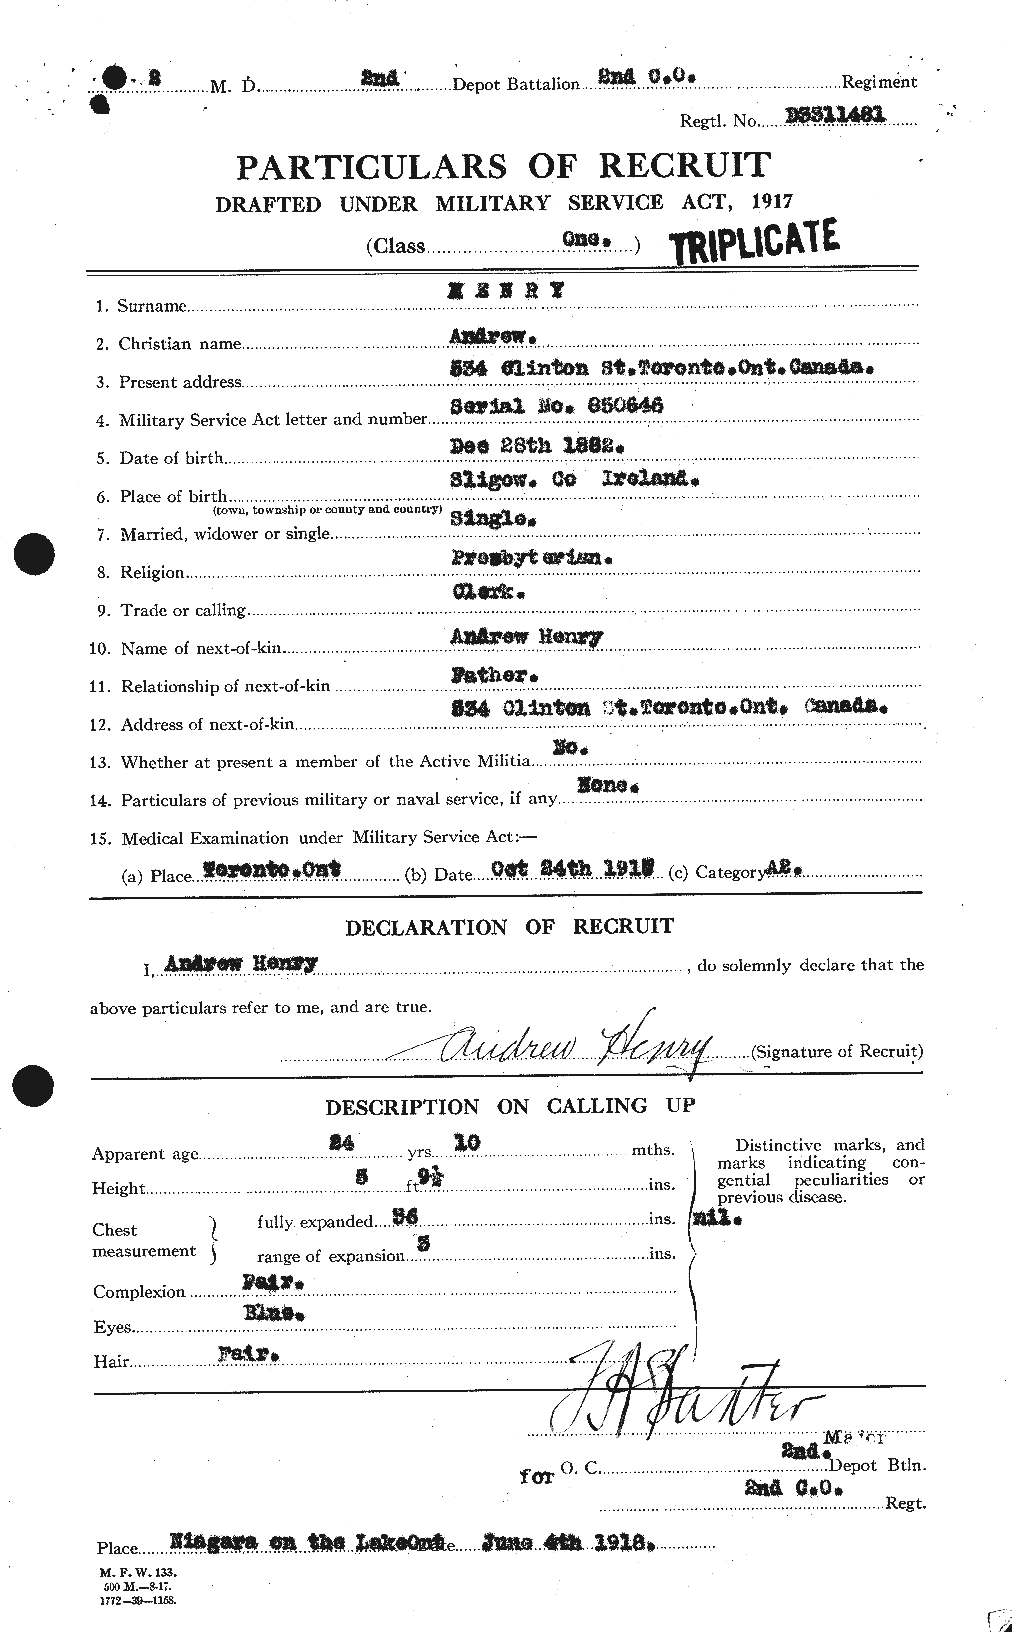 Personnel Records of the First World War - CEF 392774a